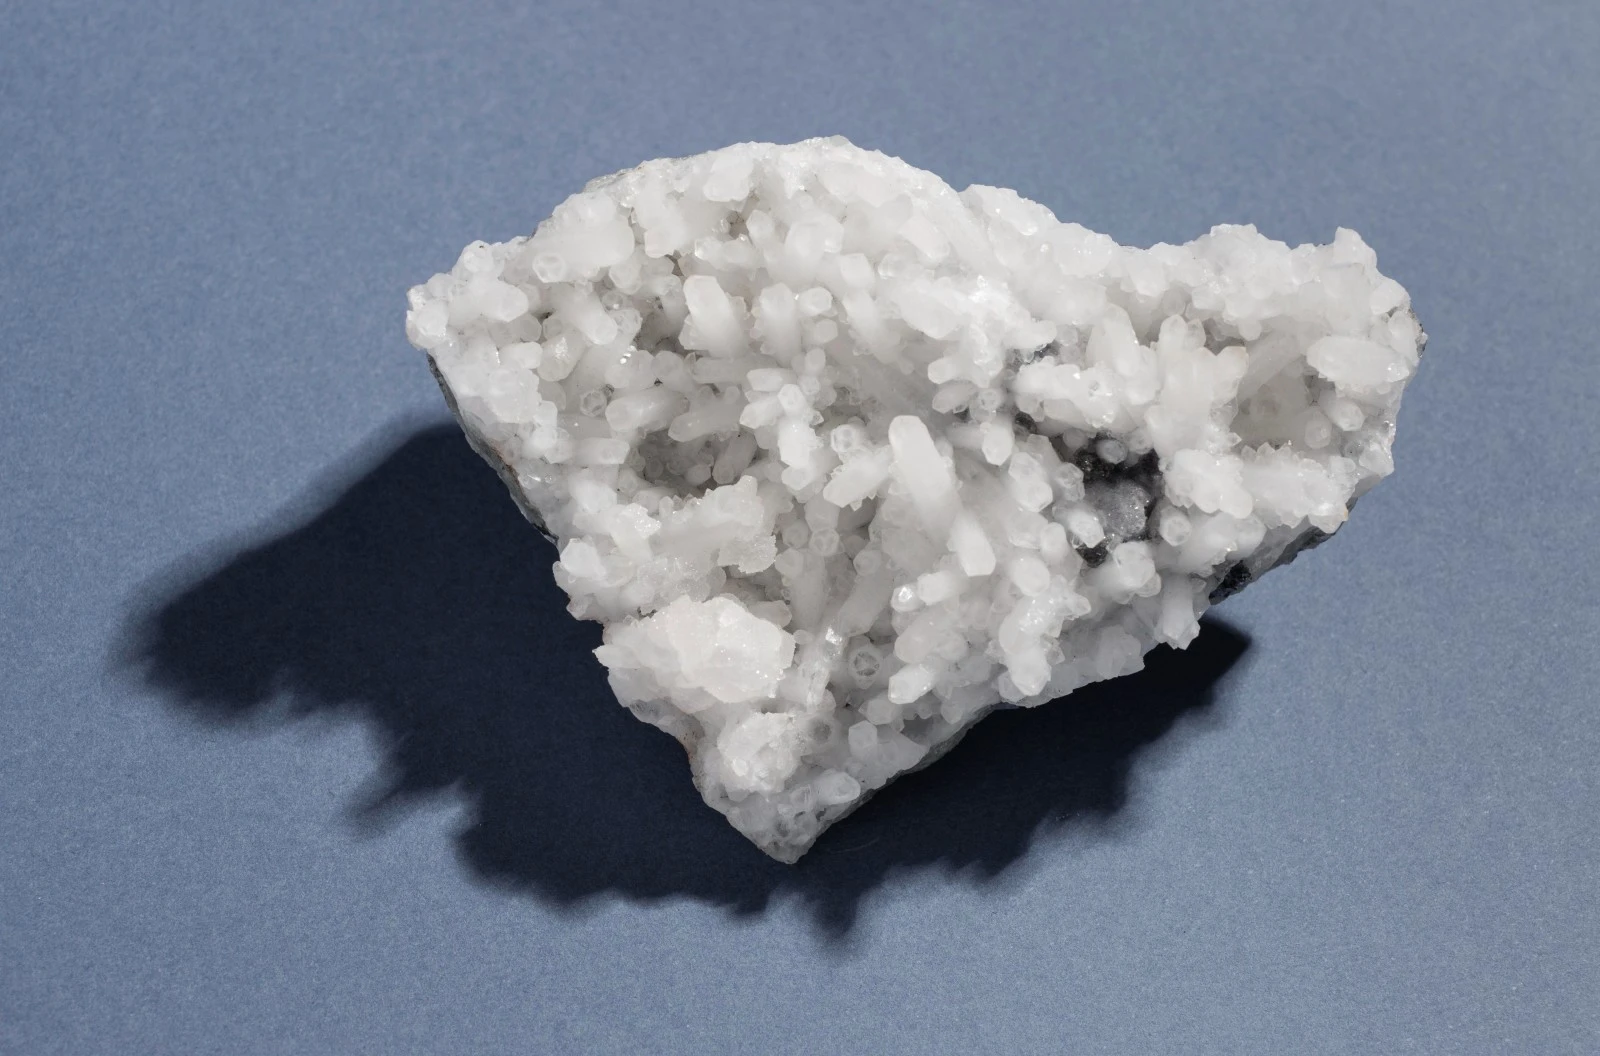 What is fumed silica